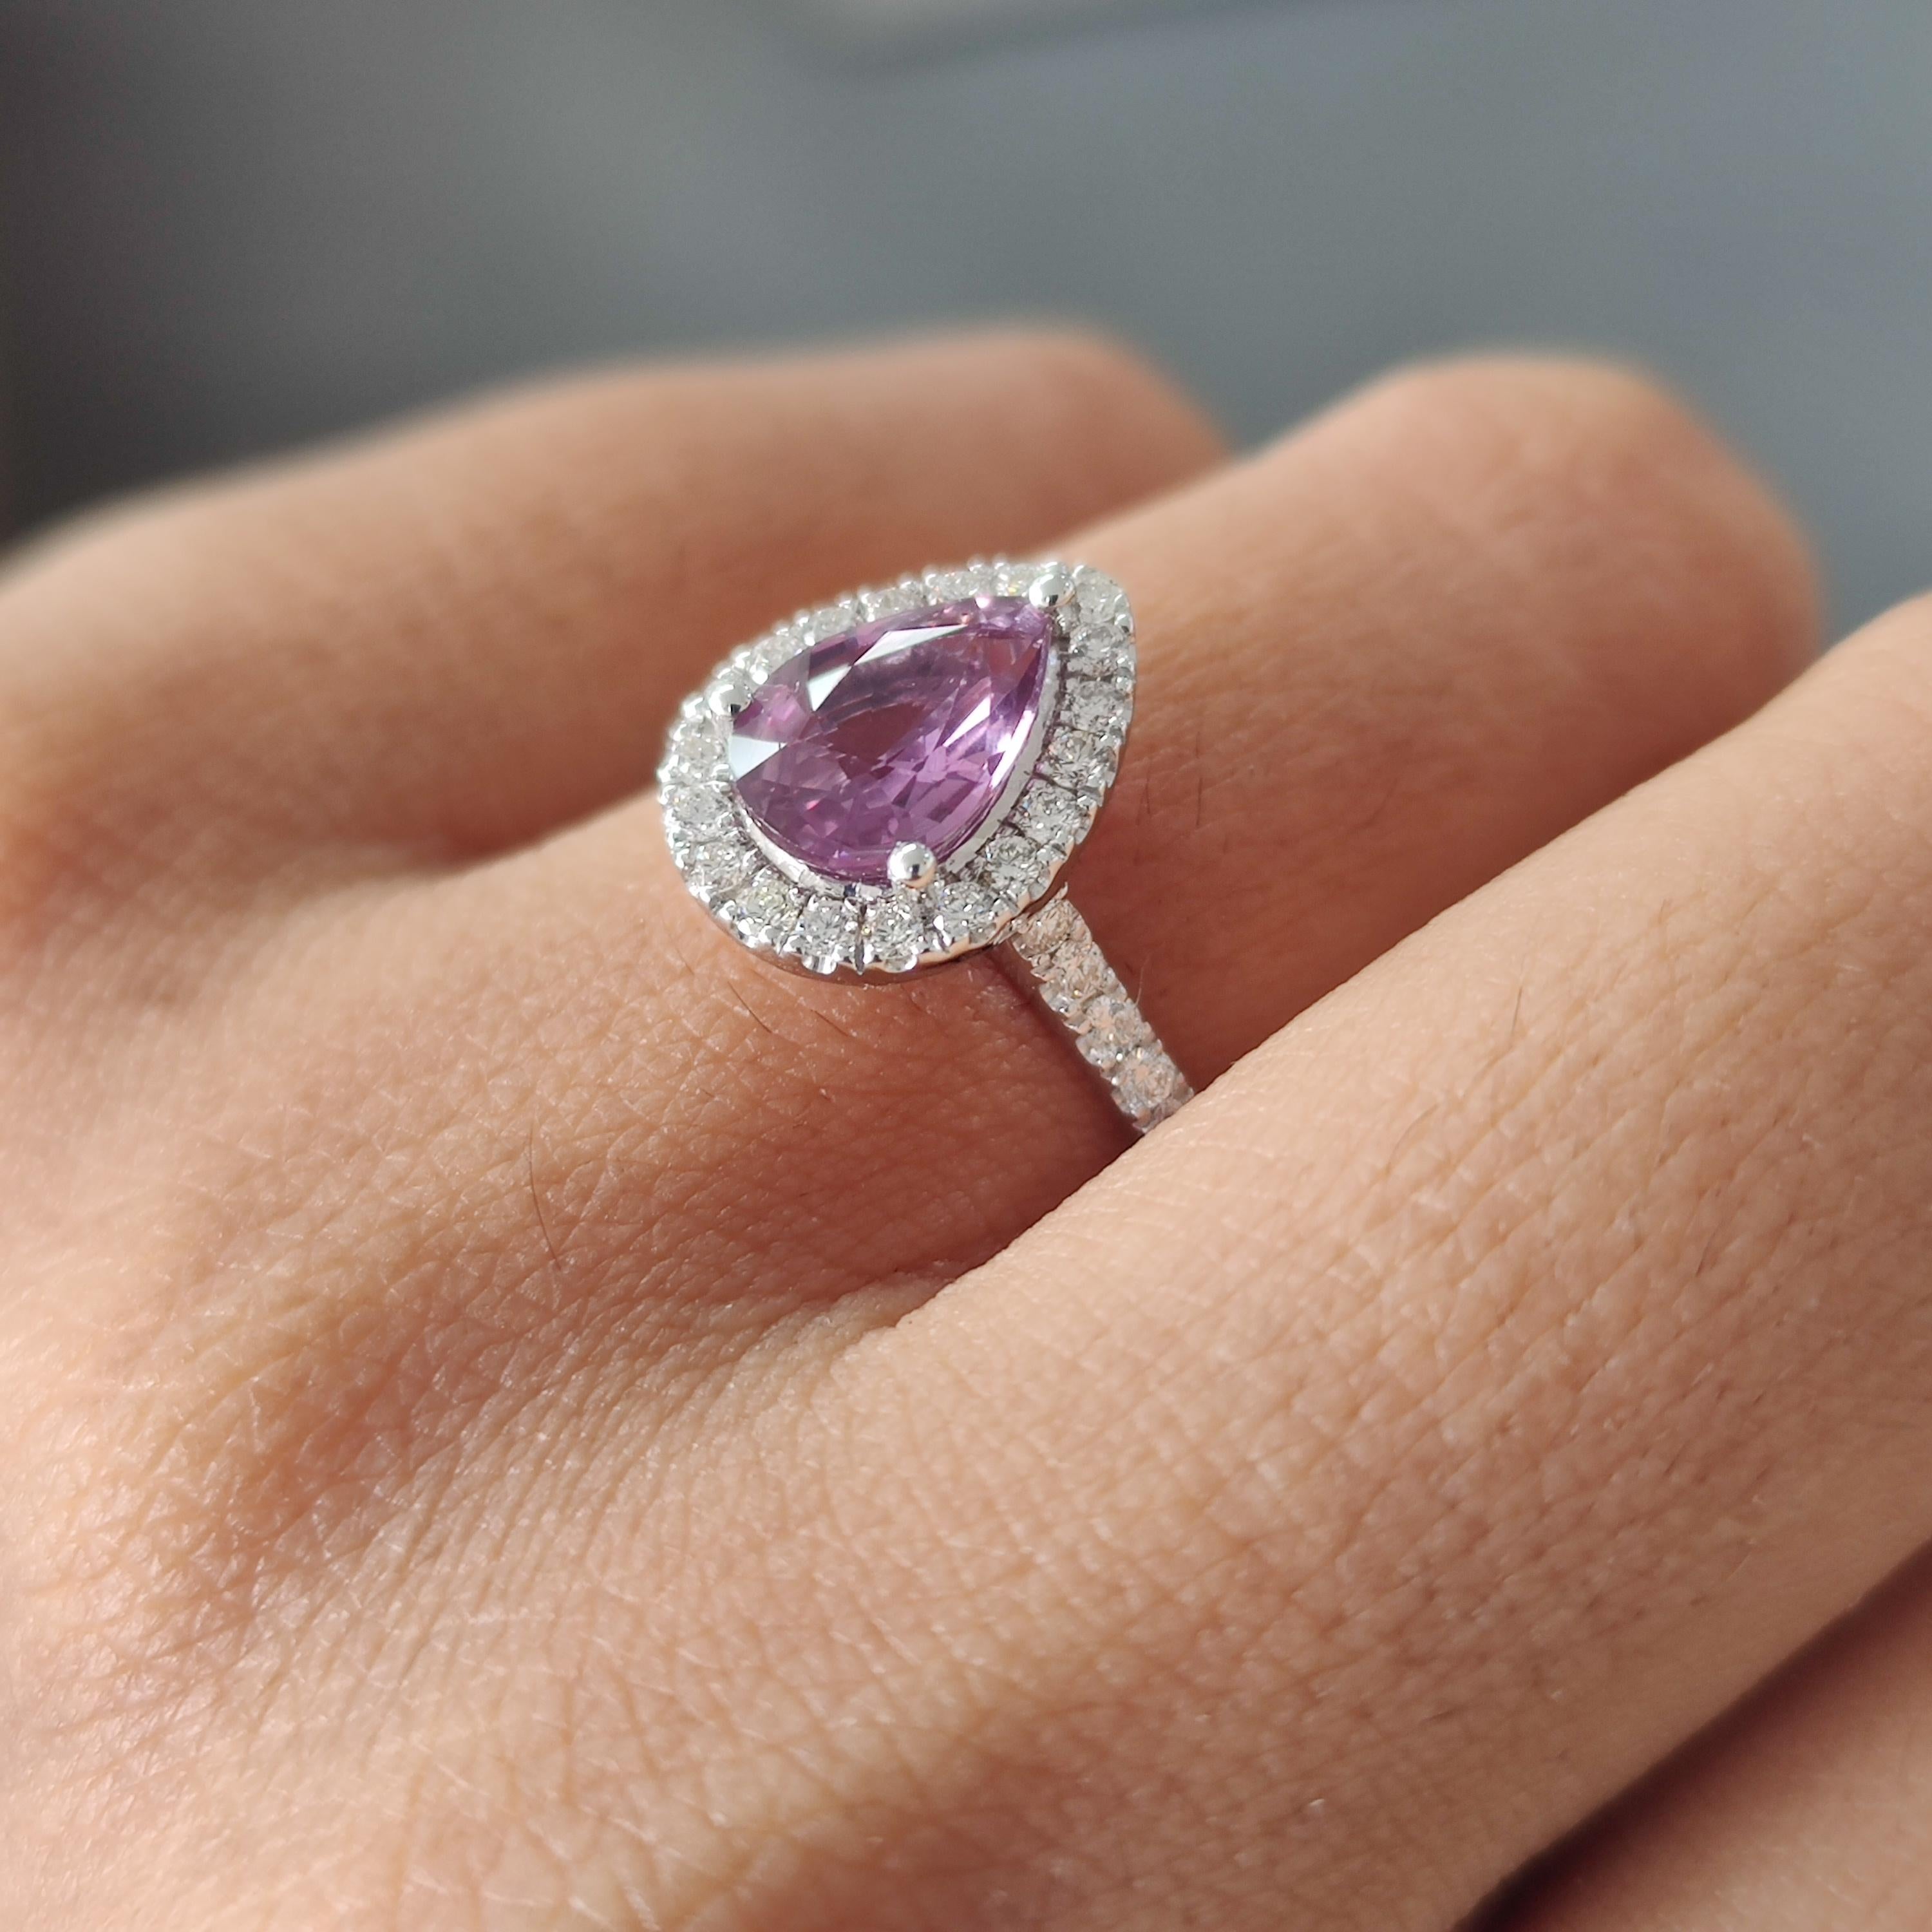 Victorian Style 1.41 Carat Pear Shape Unheated Purple Sapphire Ring in 14k Gold 1